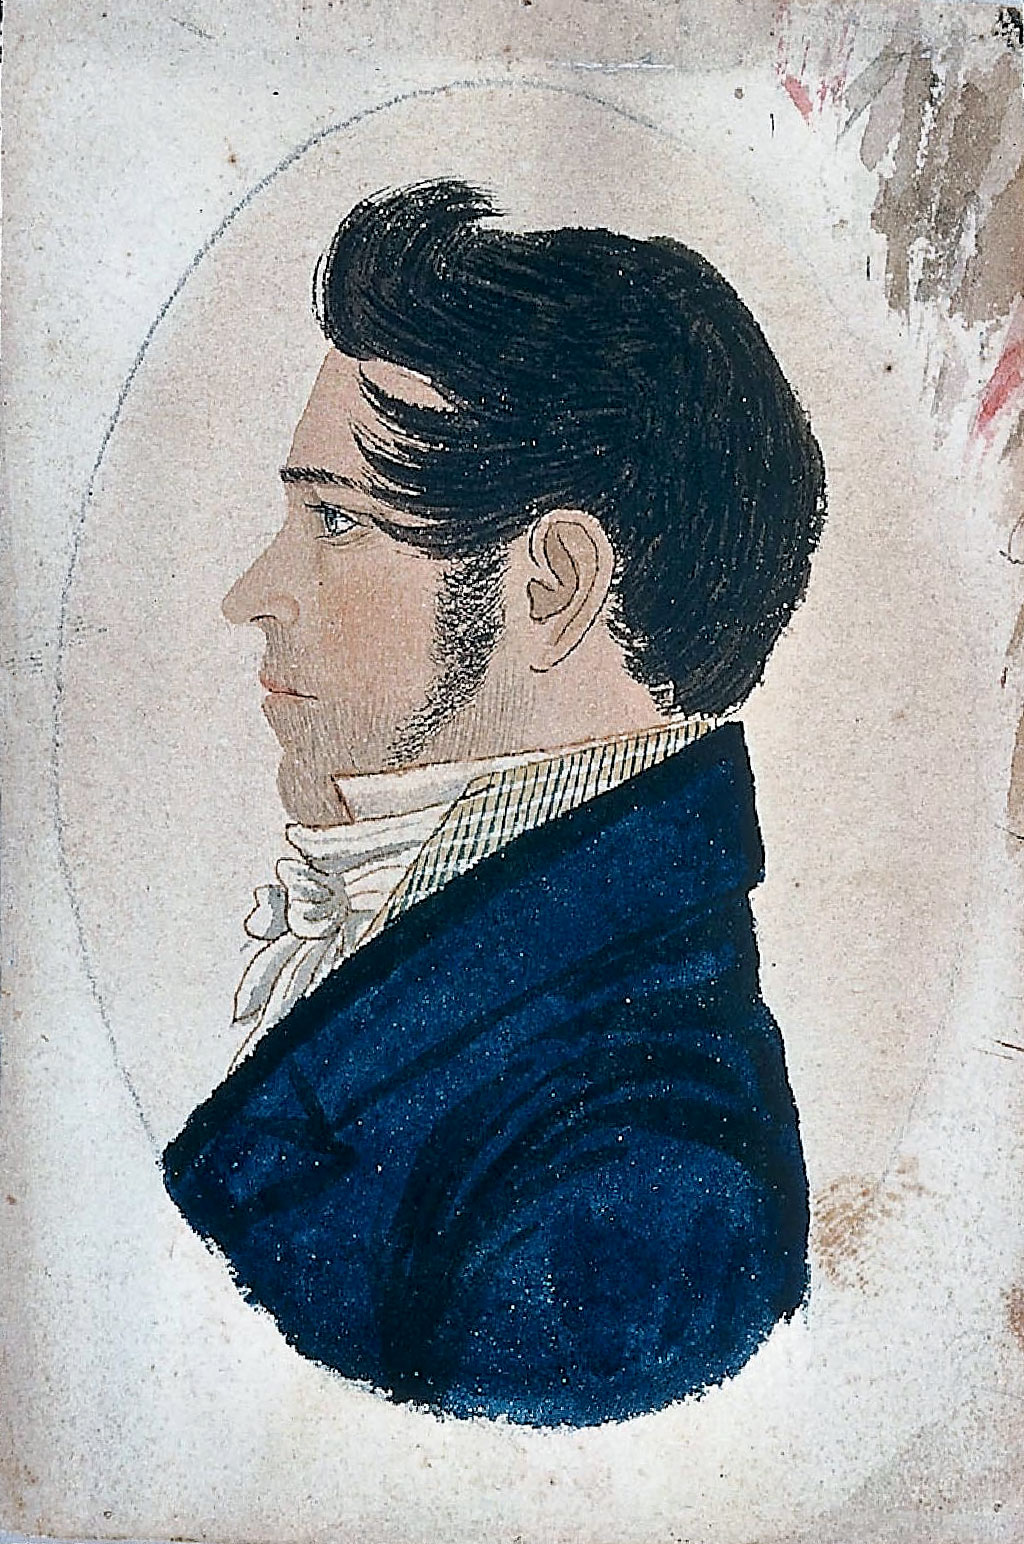 Attributed to Rufus Porter, Jacob Davis, about 1815–19